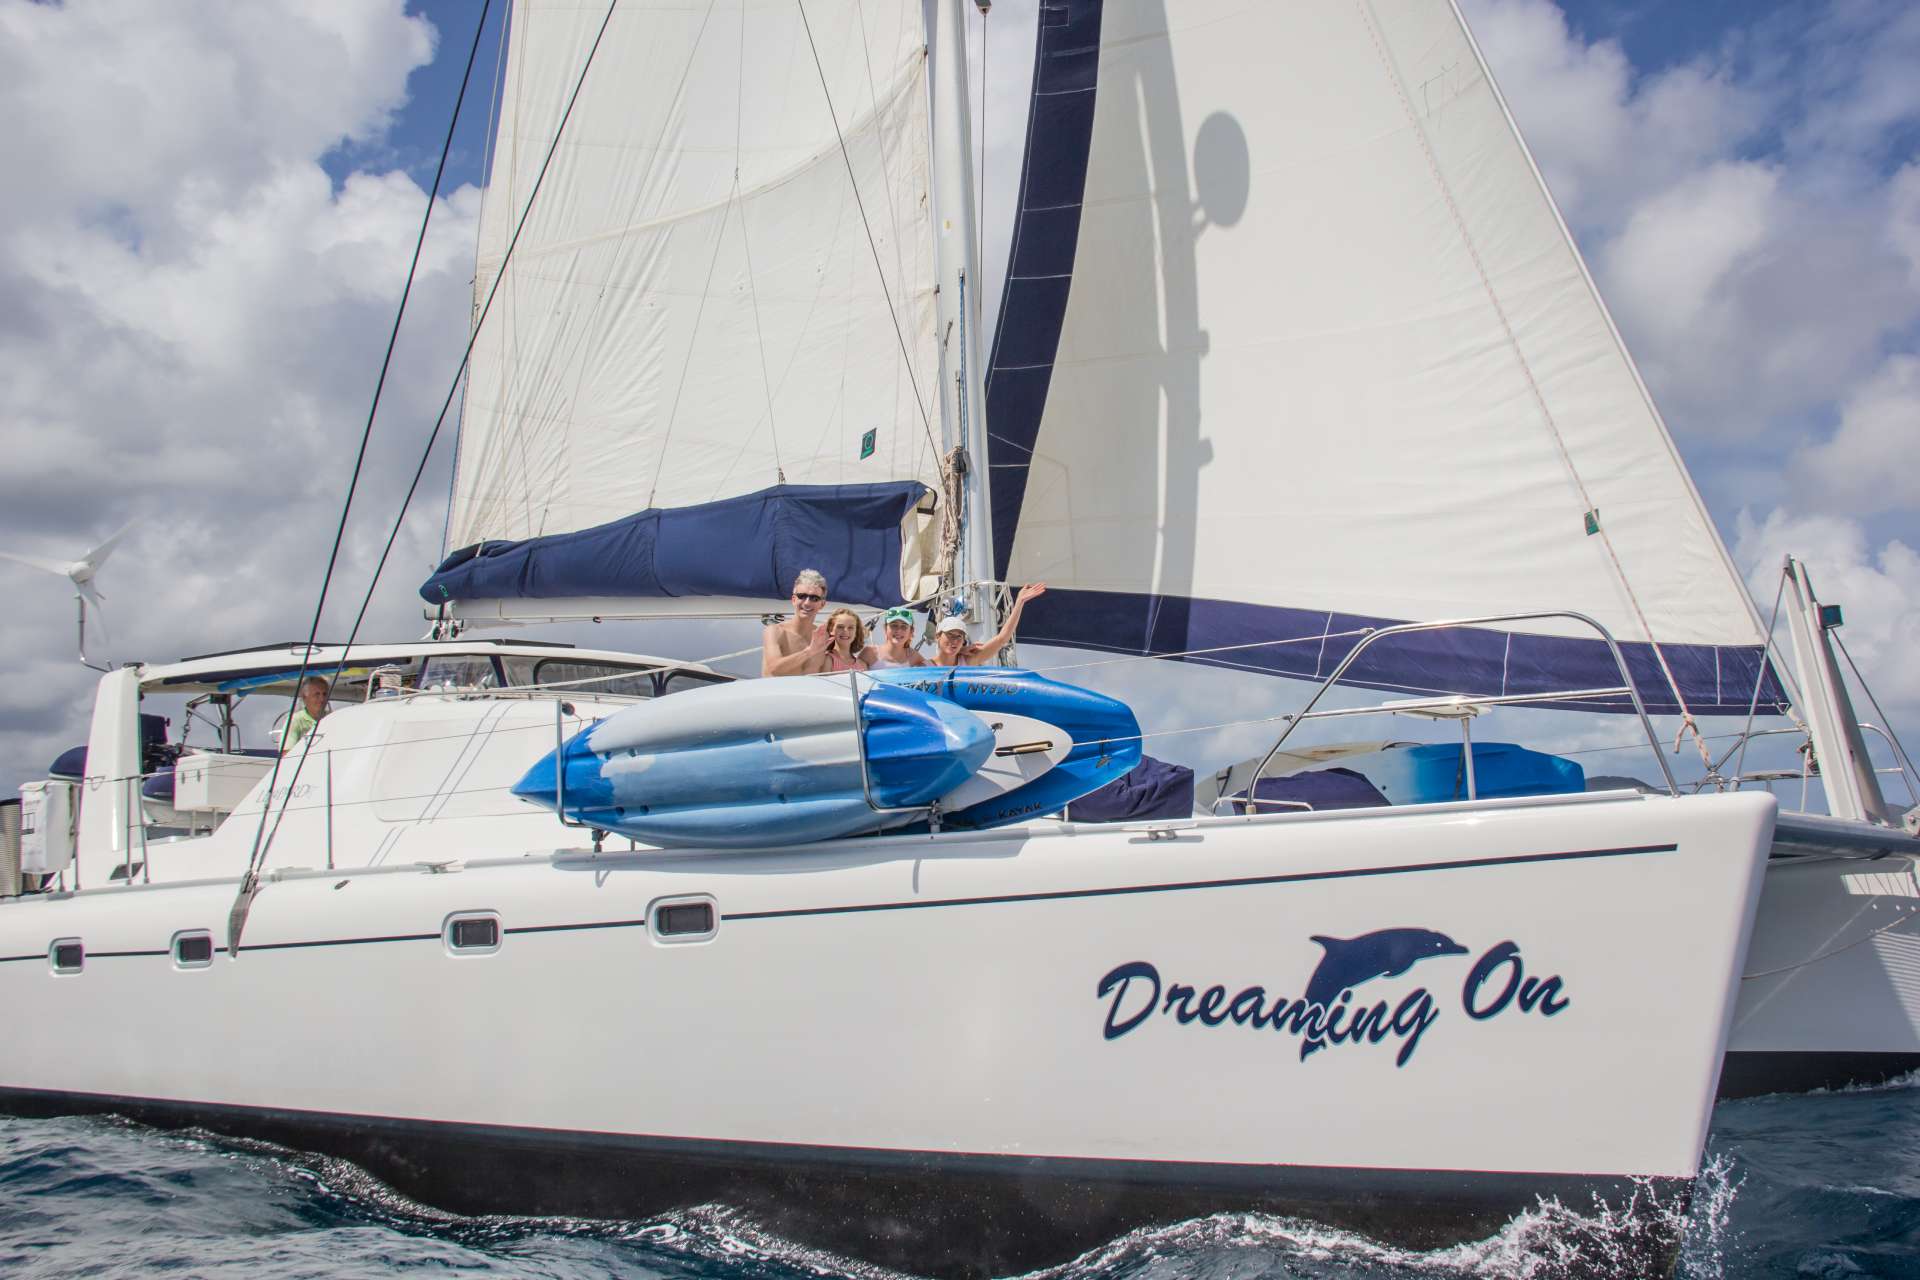 dreaming on - Yacht Charter Caribbean & Boat hire in Central america, Belize 2